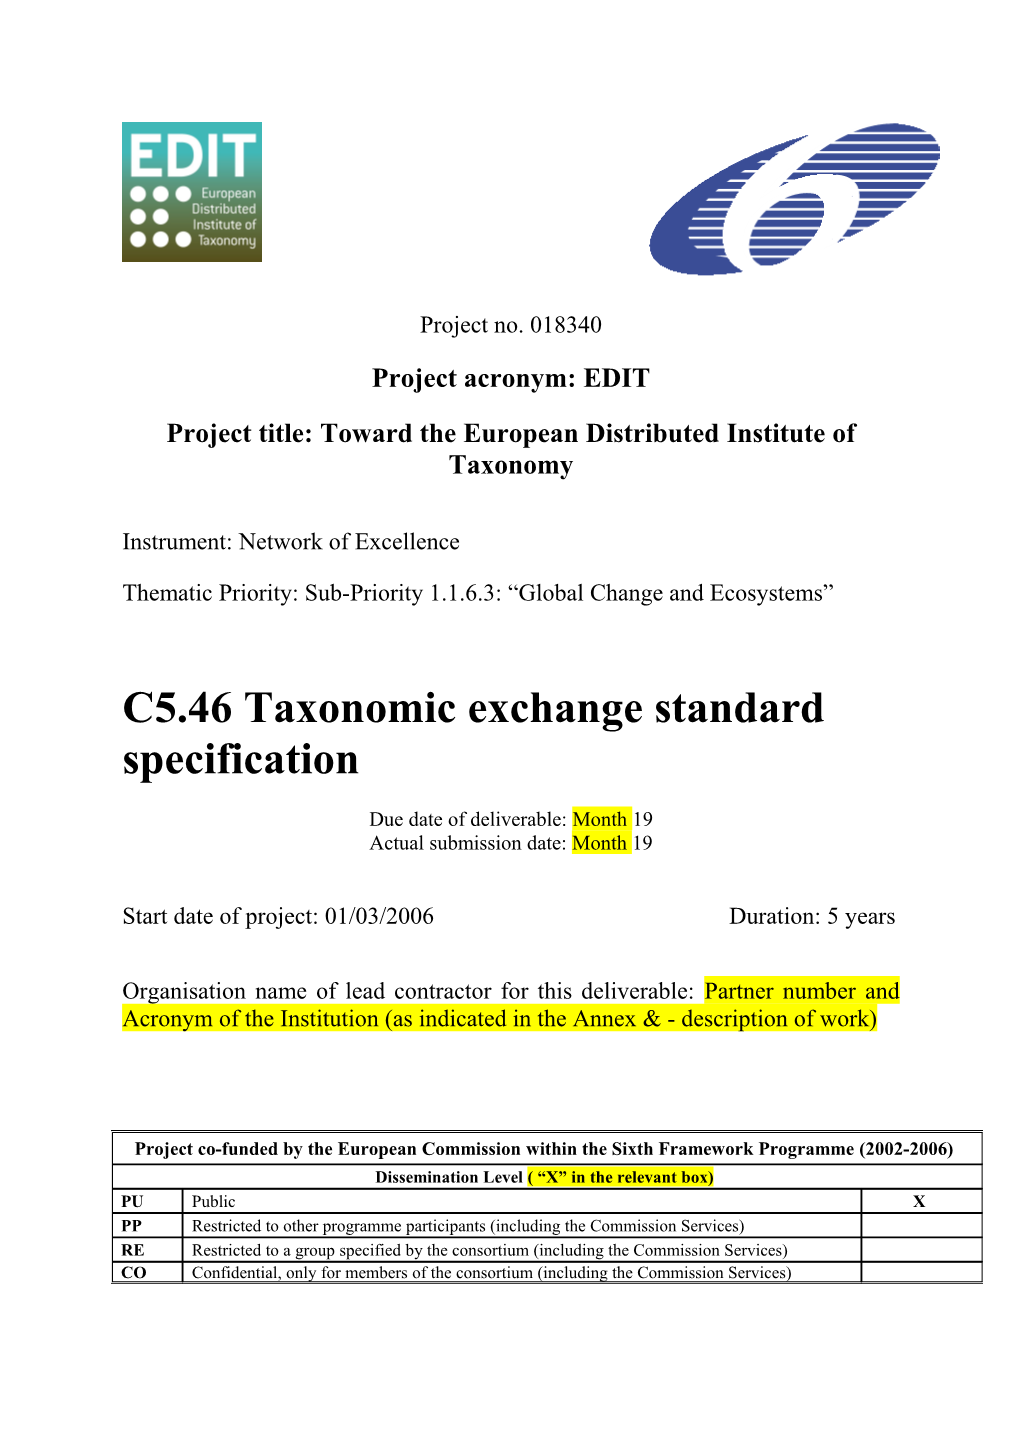 Project Title: Toward the European Distributed Institute of Taxonomy